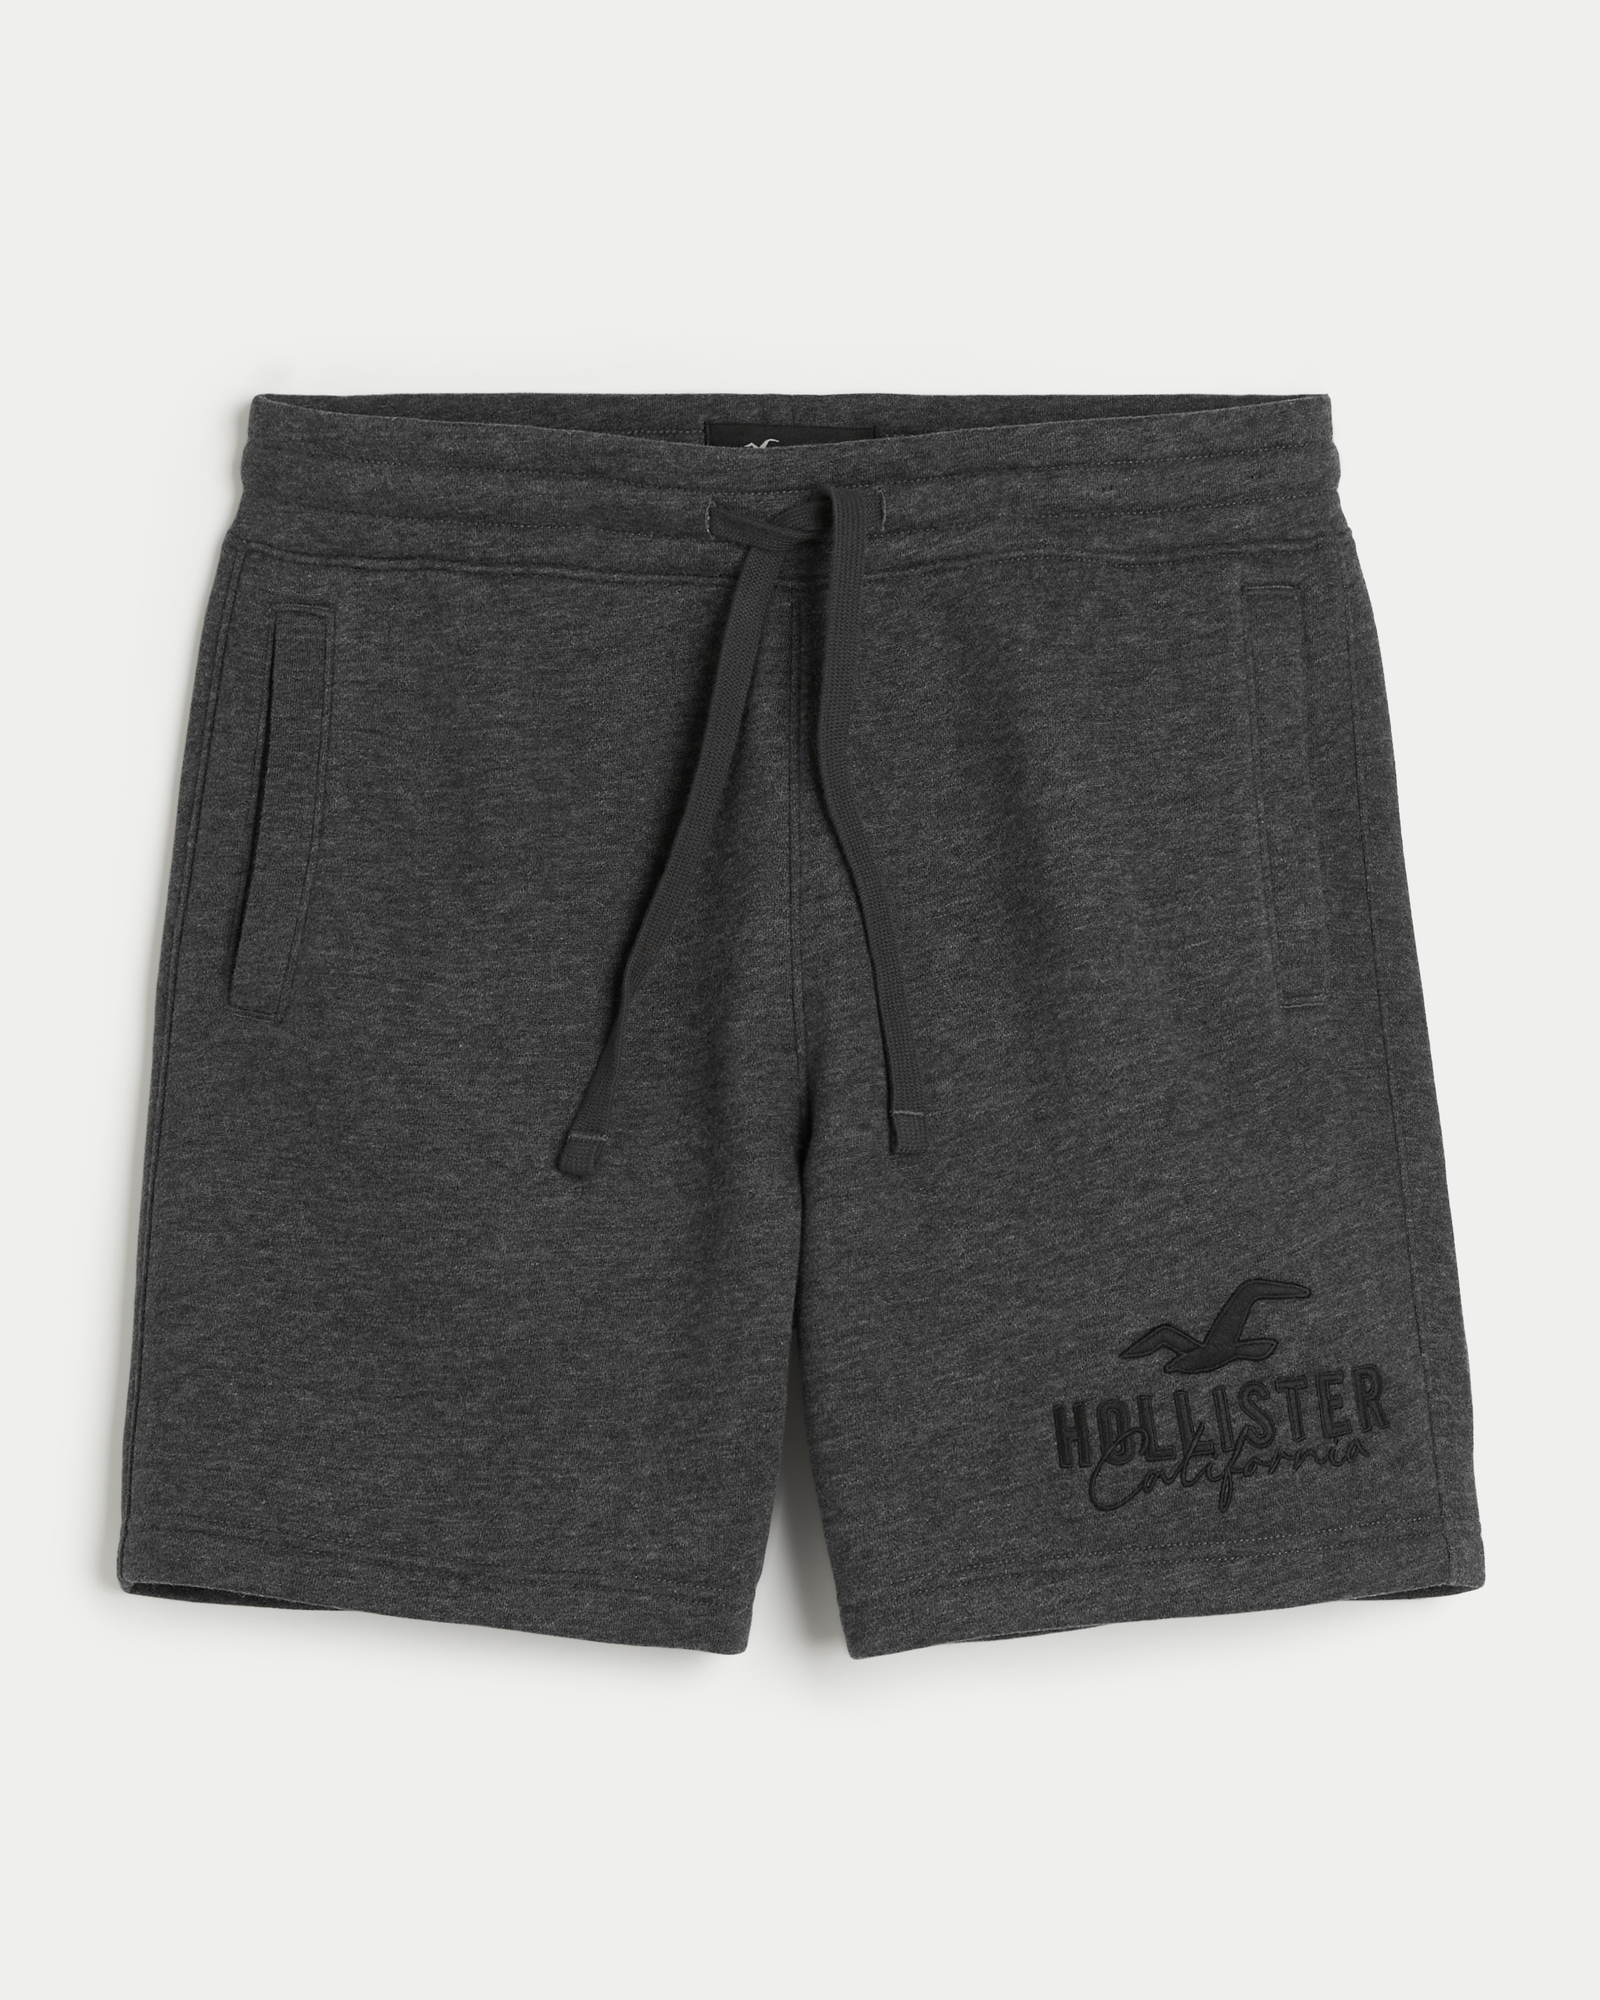 https://img.hollisterco.com/is/image/anf/KIC_328-3207-0482-132_prod1.jpg?policy=product-extra-large